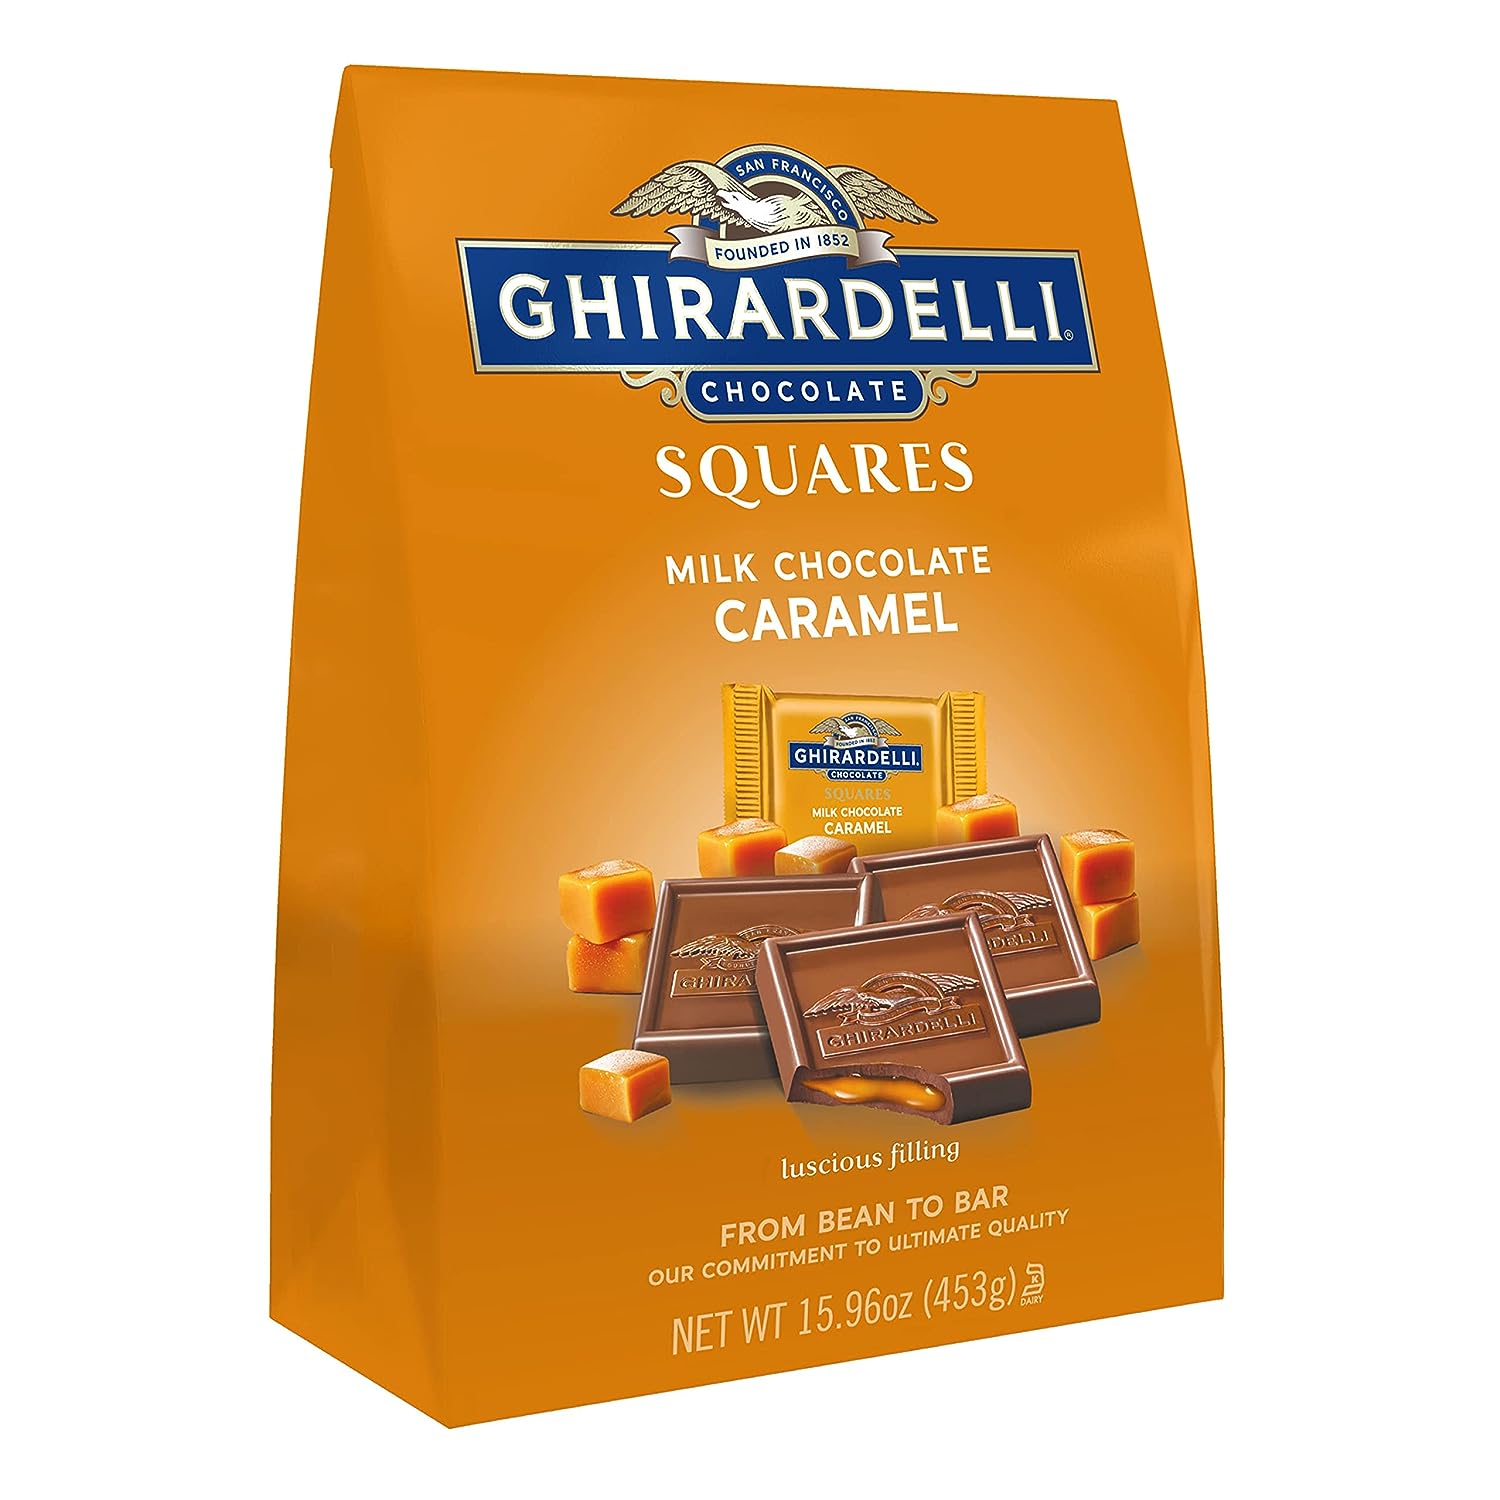 GHIRARDELLI Milk Chocolate Squares with Caramel Filling, Mother's Day Chocolate 15.96 OZ Bag